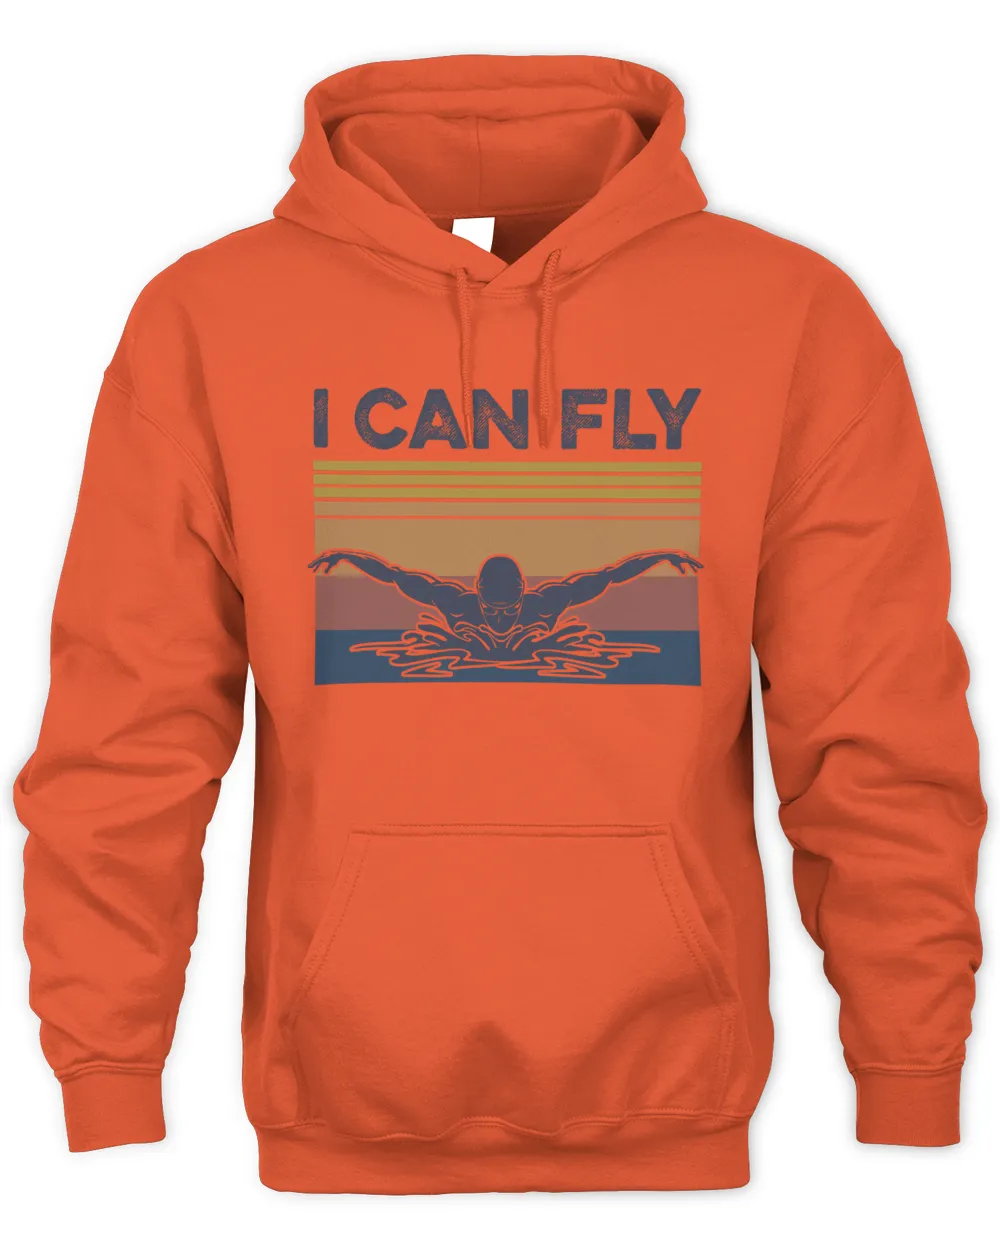 I can fly